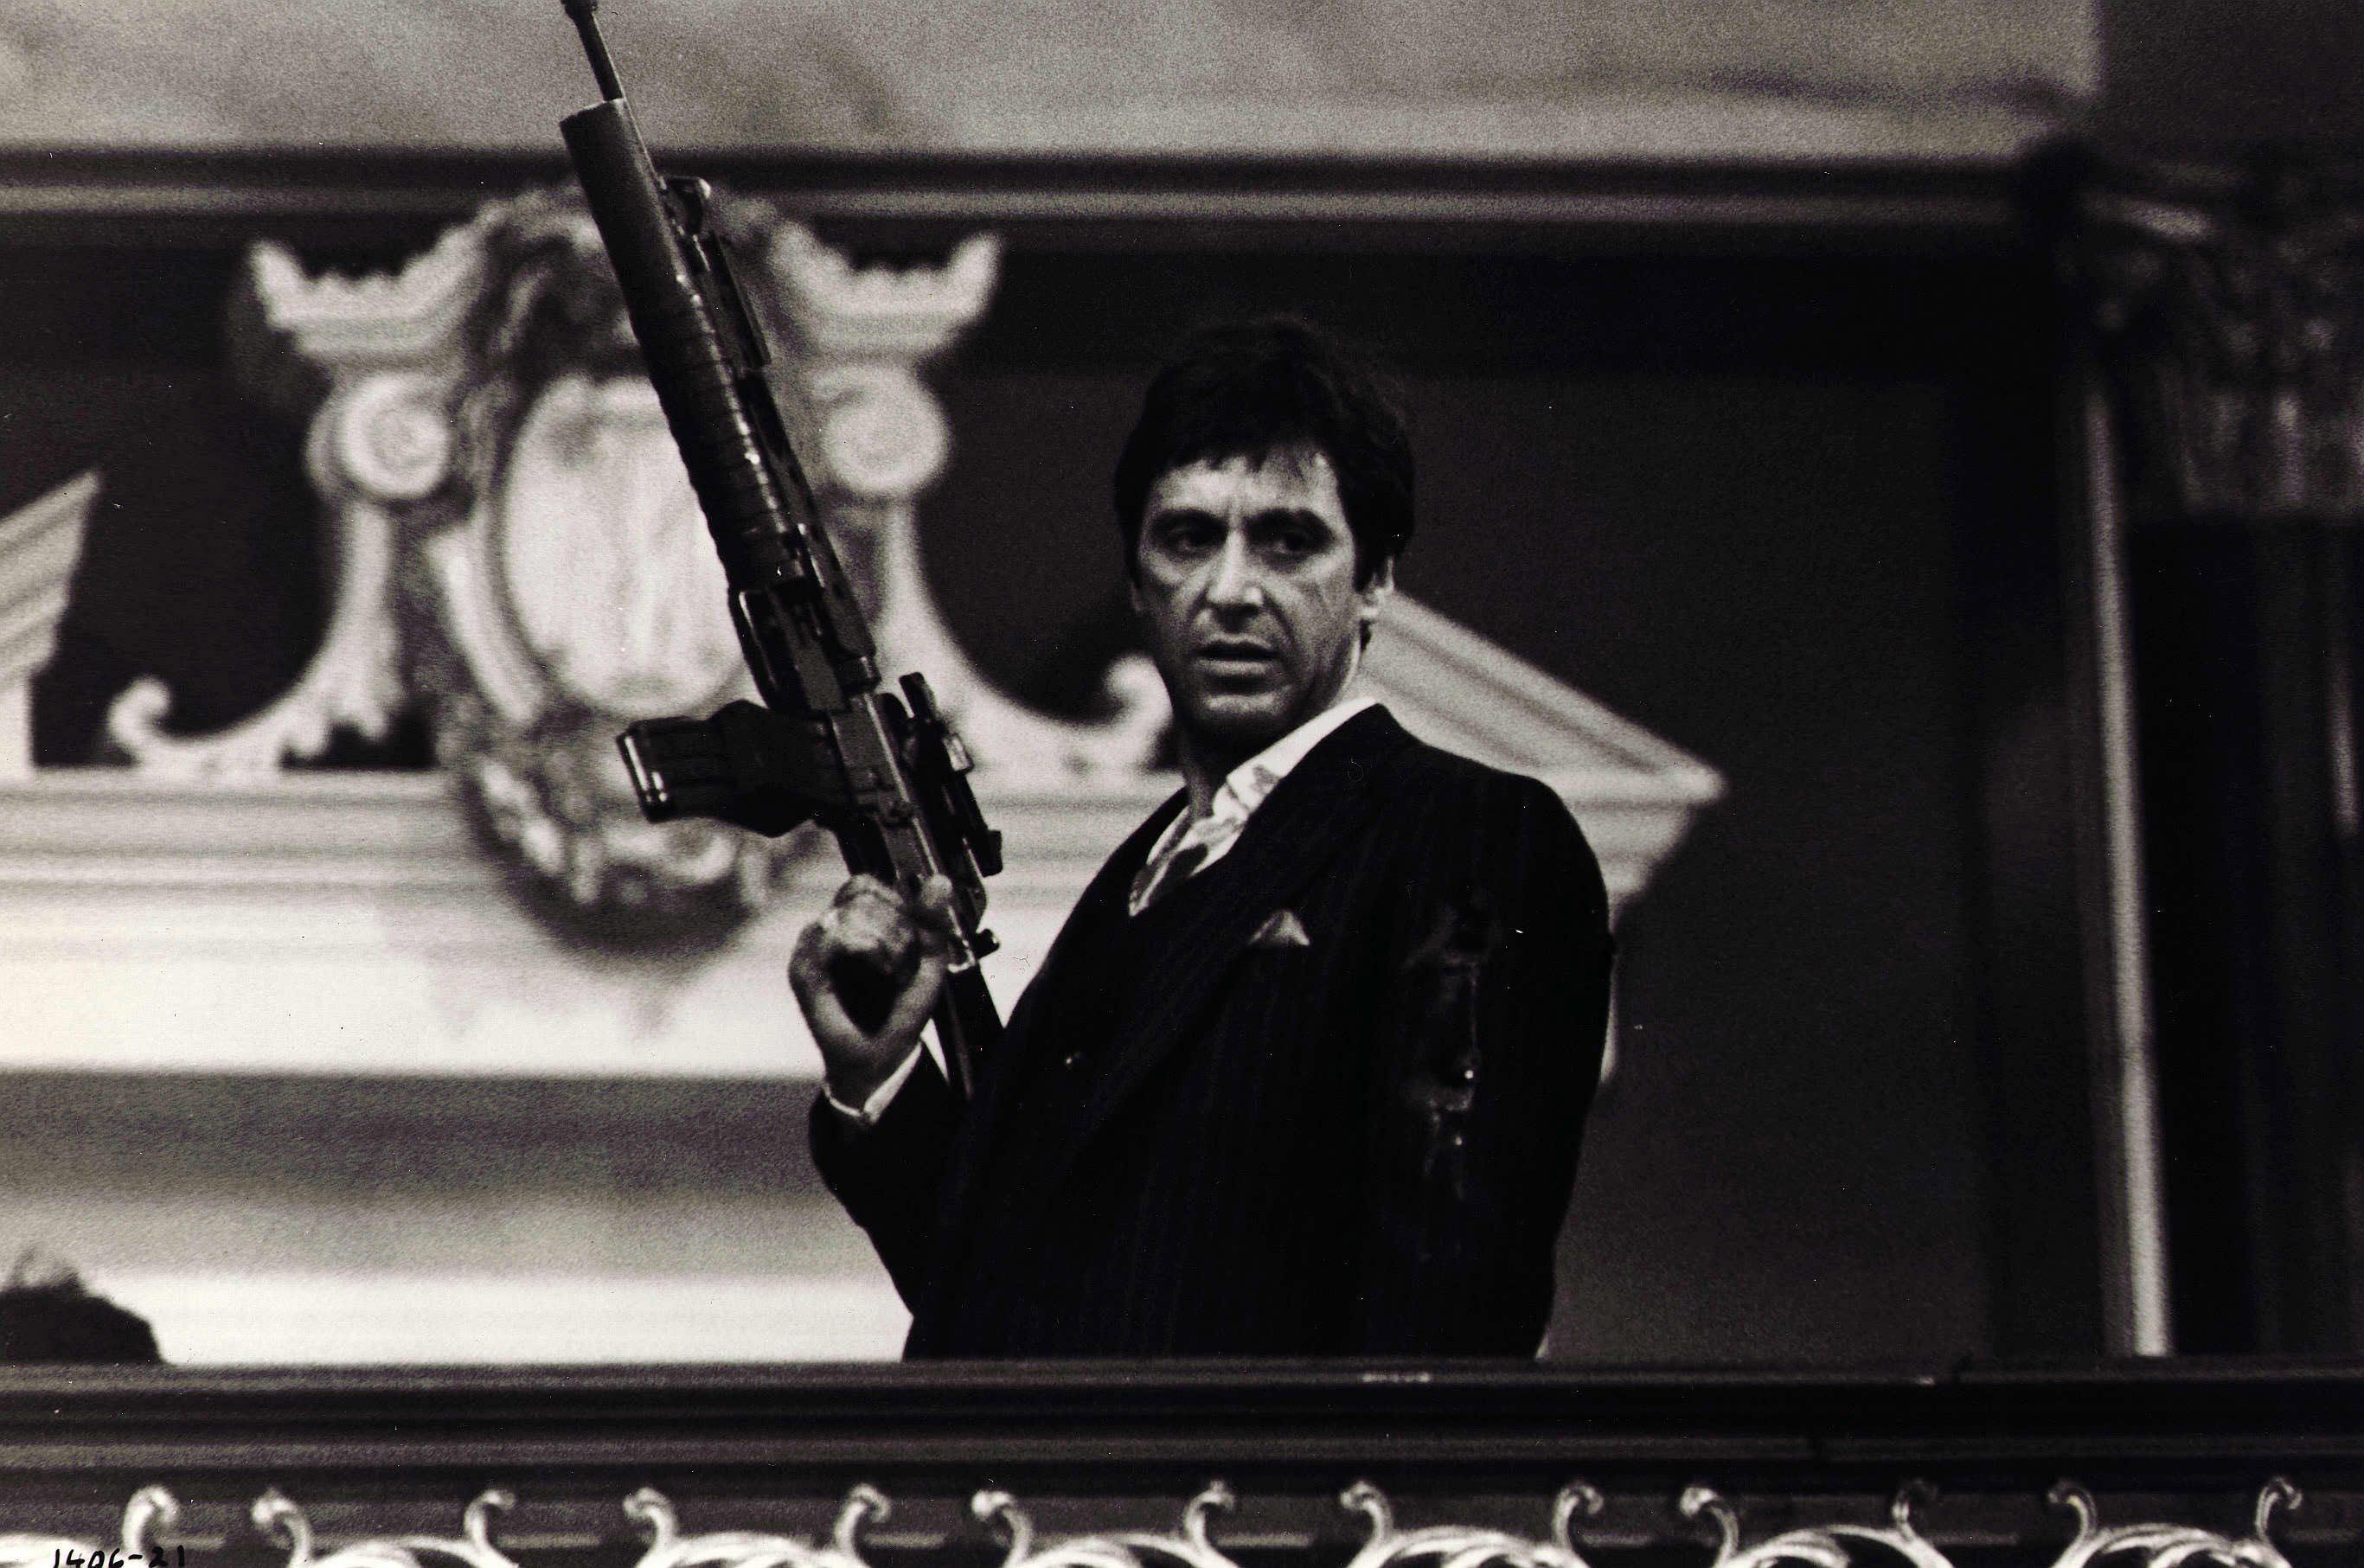 download scarface for pc